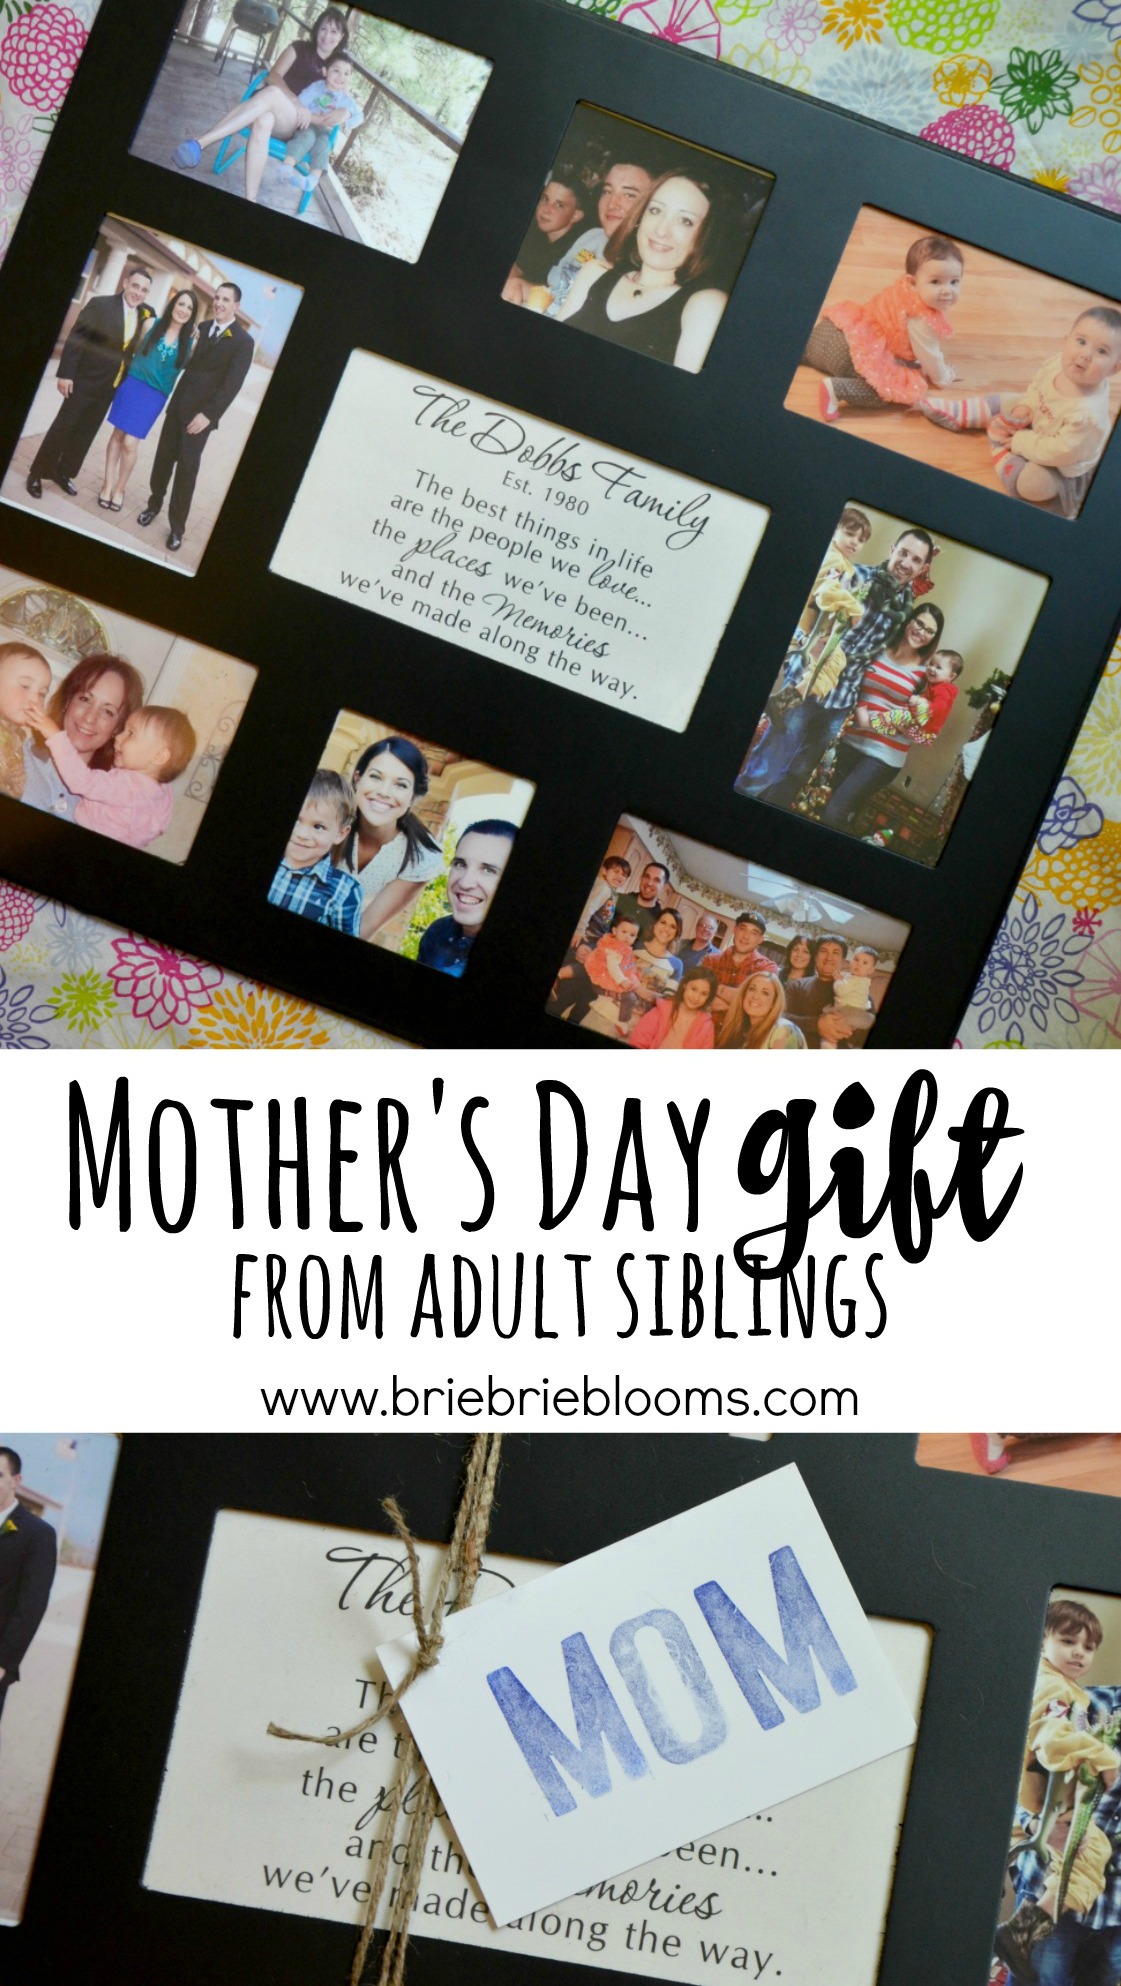 Mother's Day gift from adult siblings gifts.com